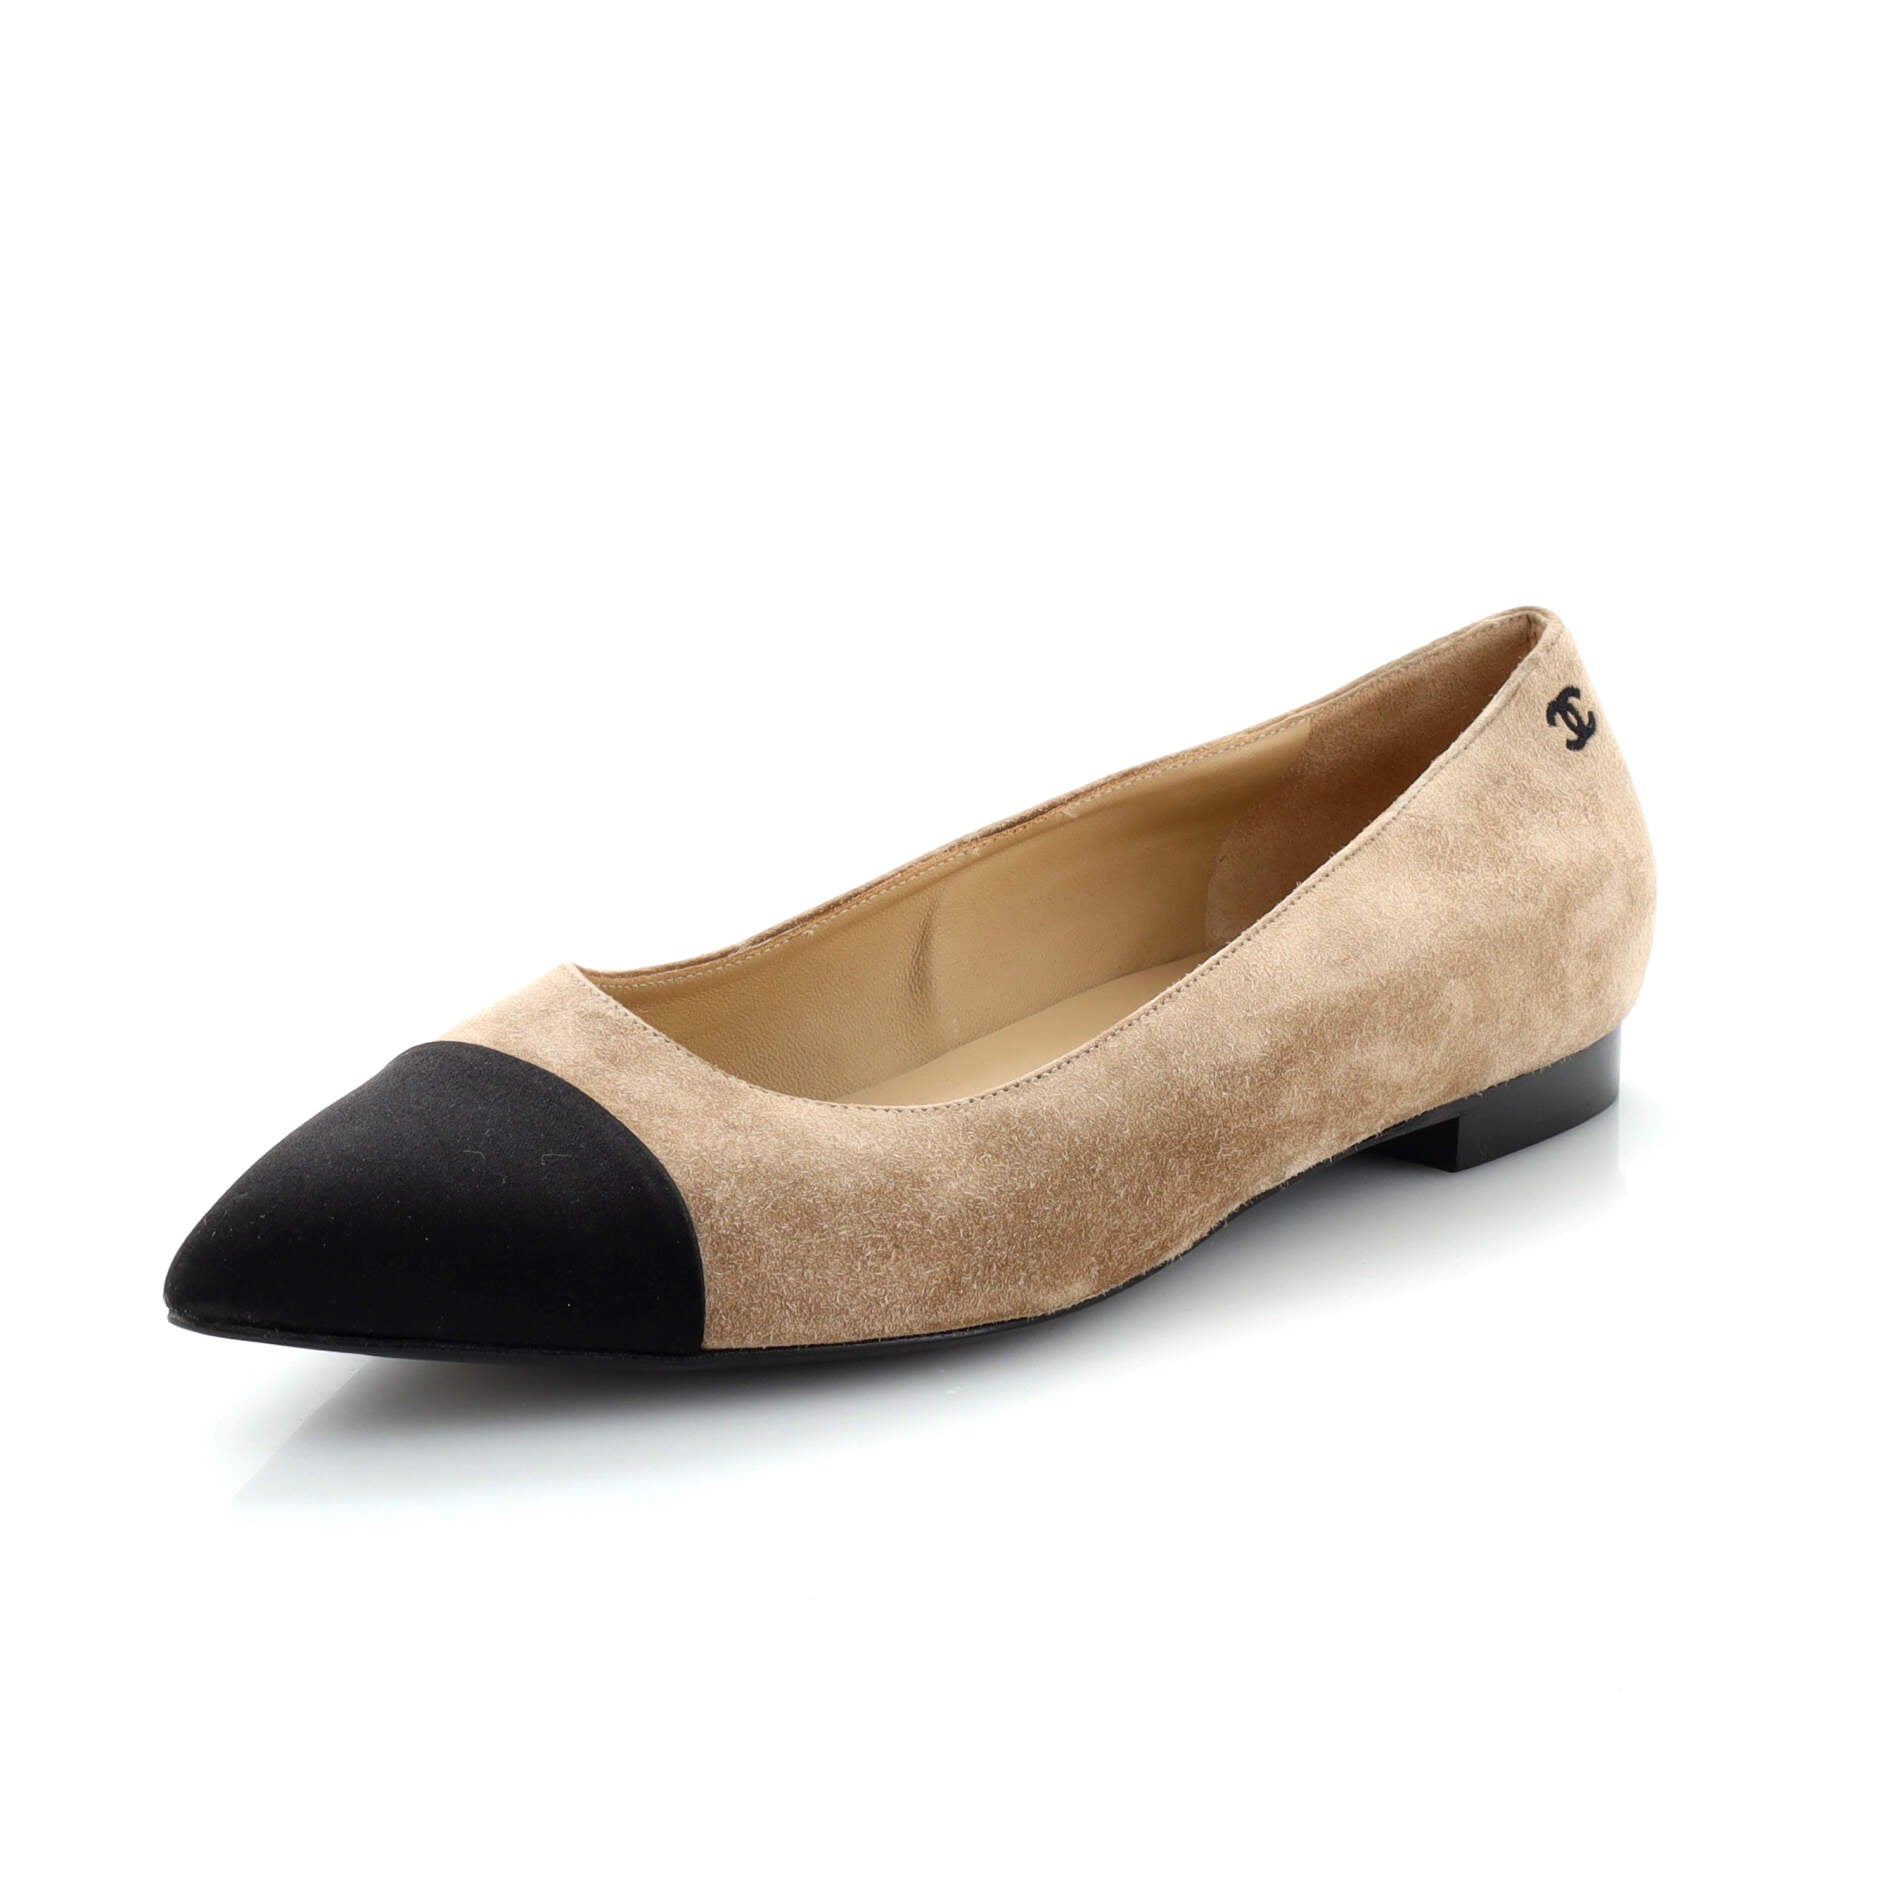 Women's CC Pointed Cap Toe Flats Suede